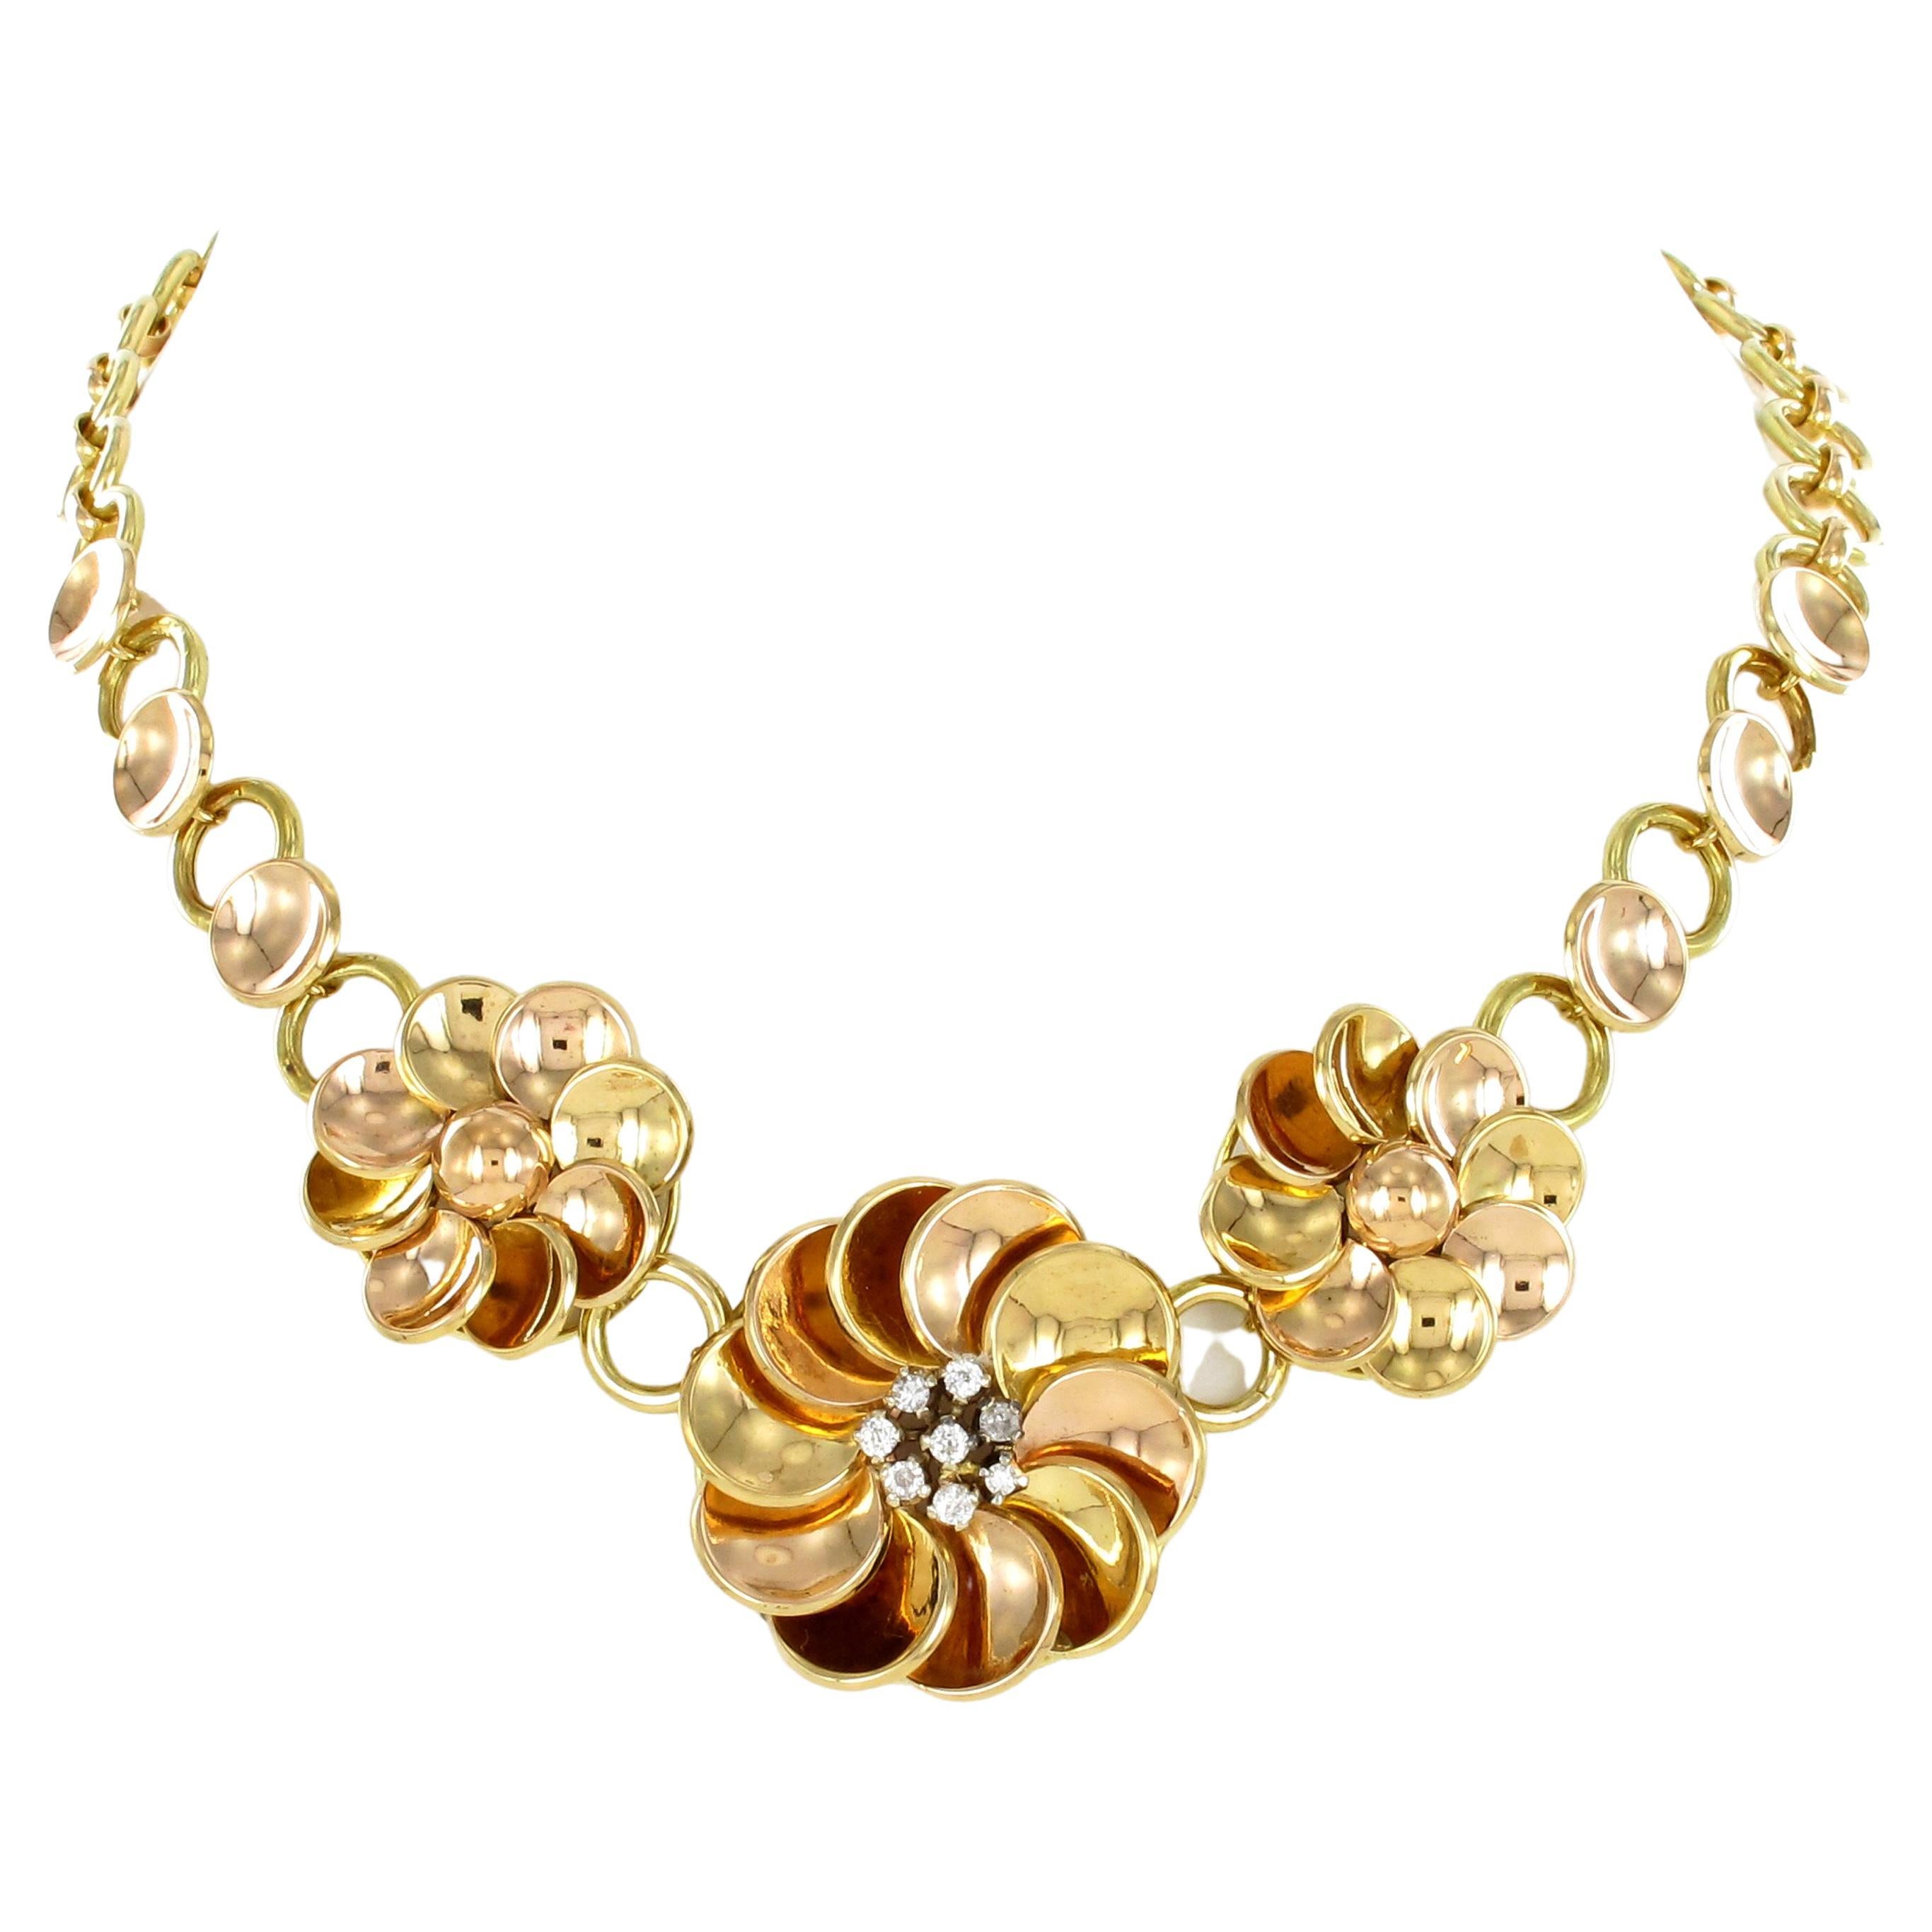 Retro Diamond Necklace in 18 Karat Yellow and Rose Gold